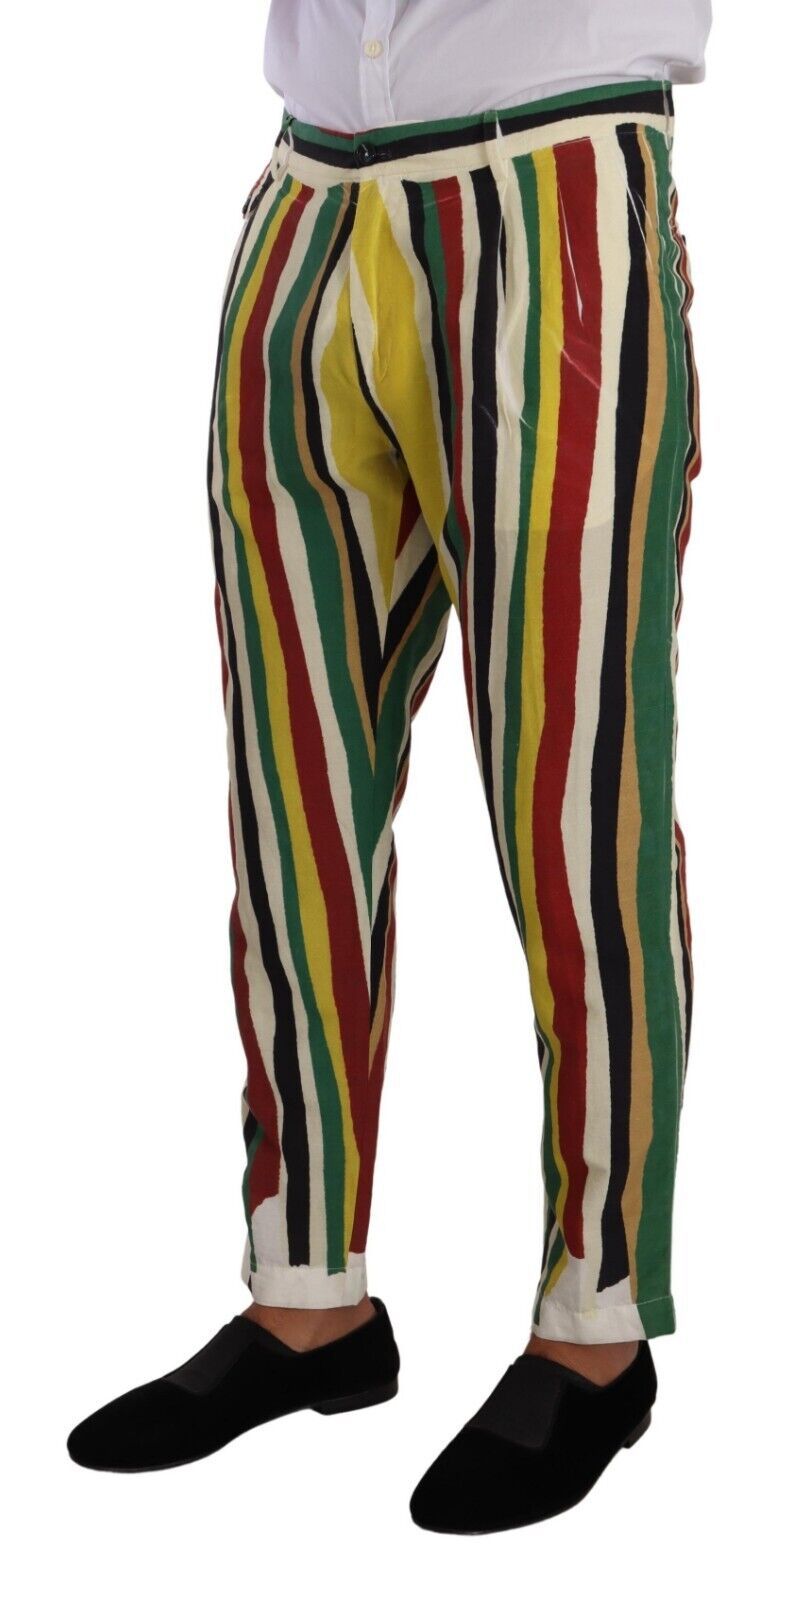 Dolce & Gabbana Multicolor Striped Linen Cotton Pants - Gio Beverly Hills